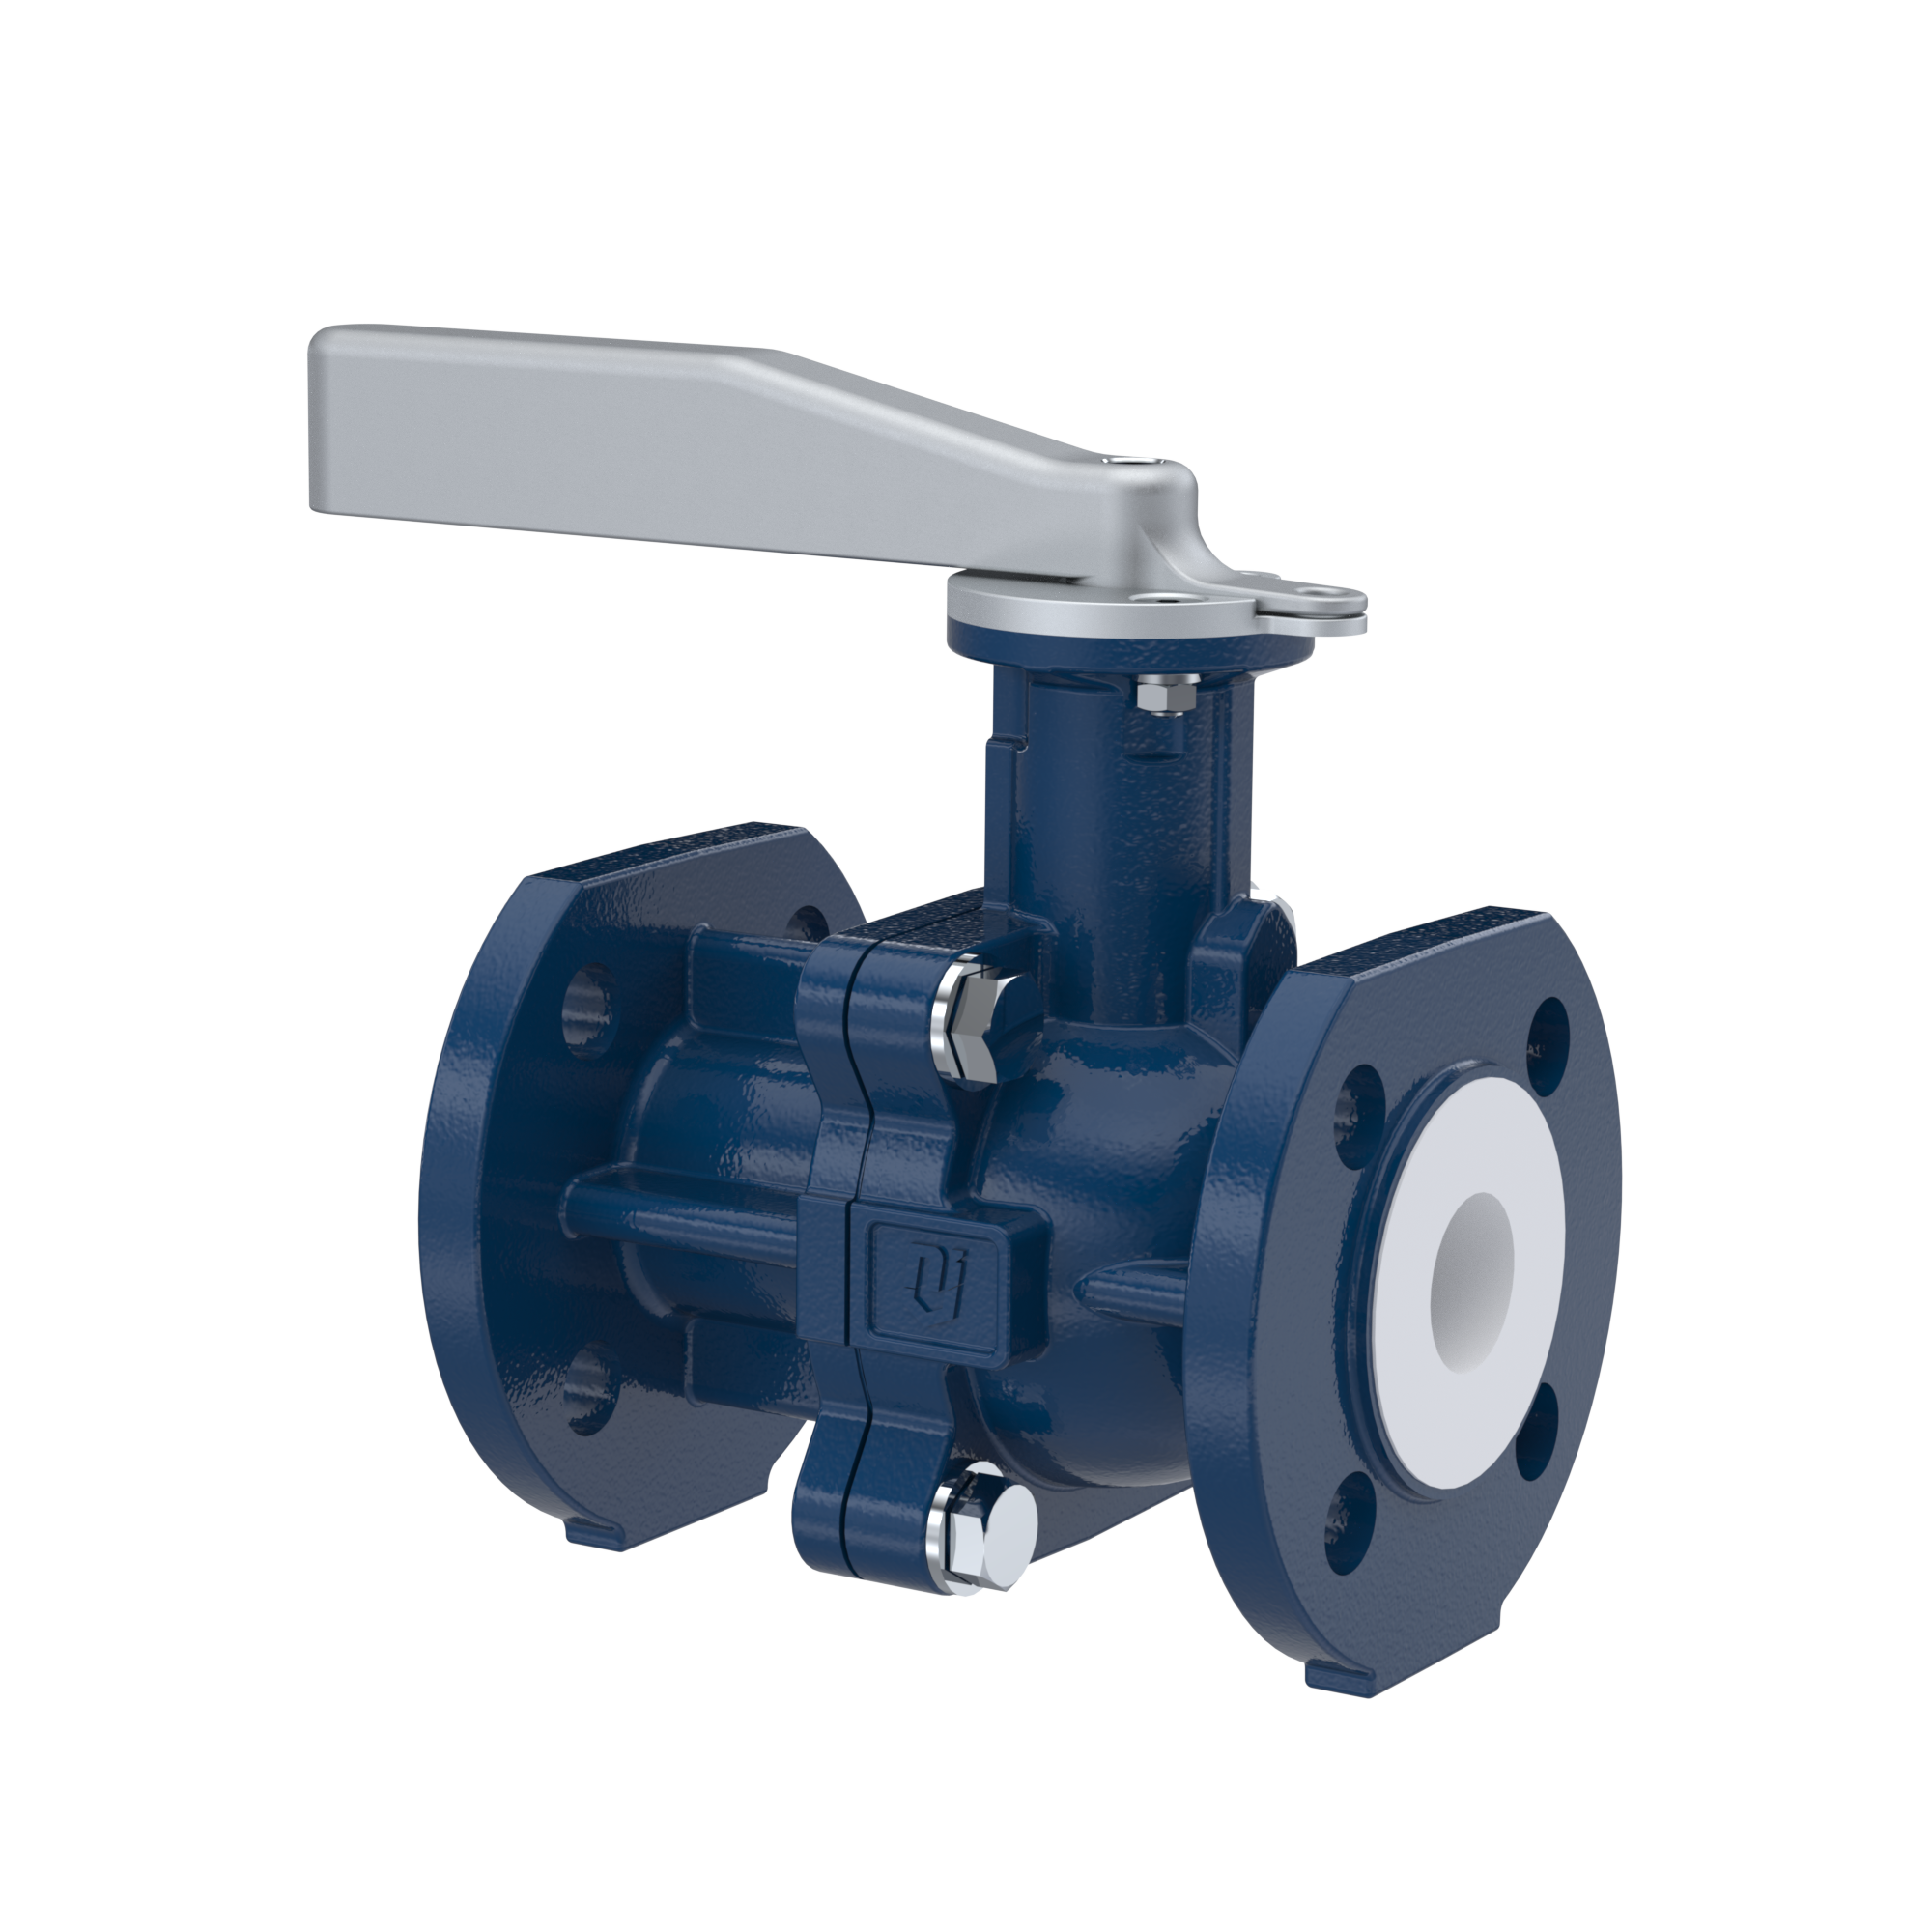 PFA-flange ball valve FK13 DN40 - 1 1/2" inch PN10/16 made of spheroidal graphite cast iron with lever hand